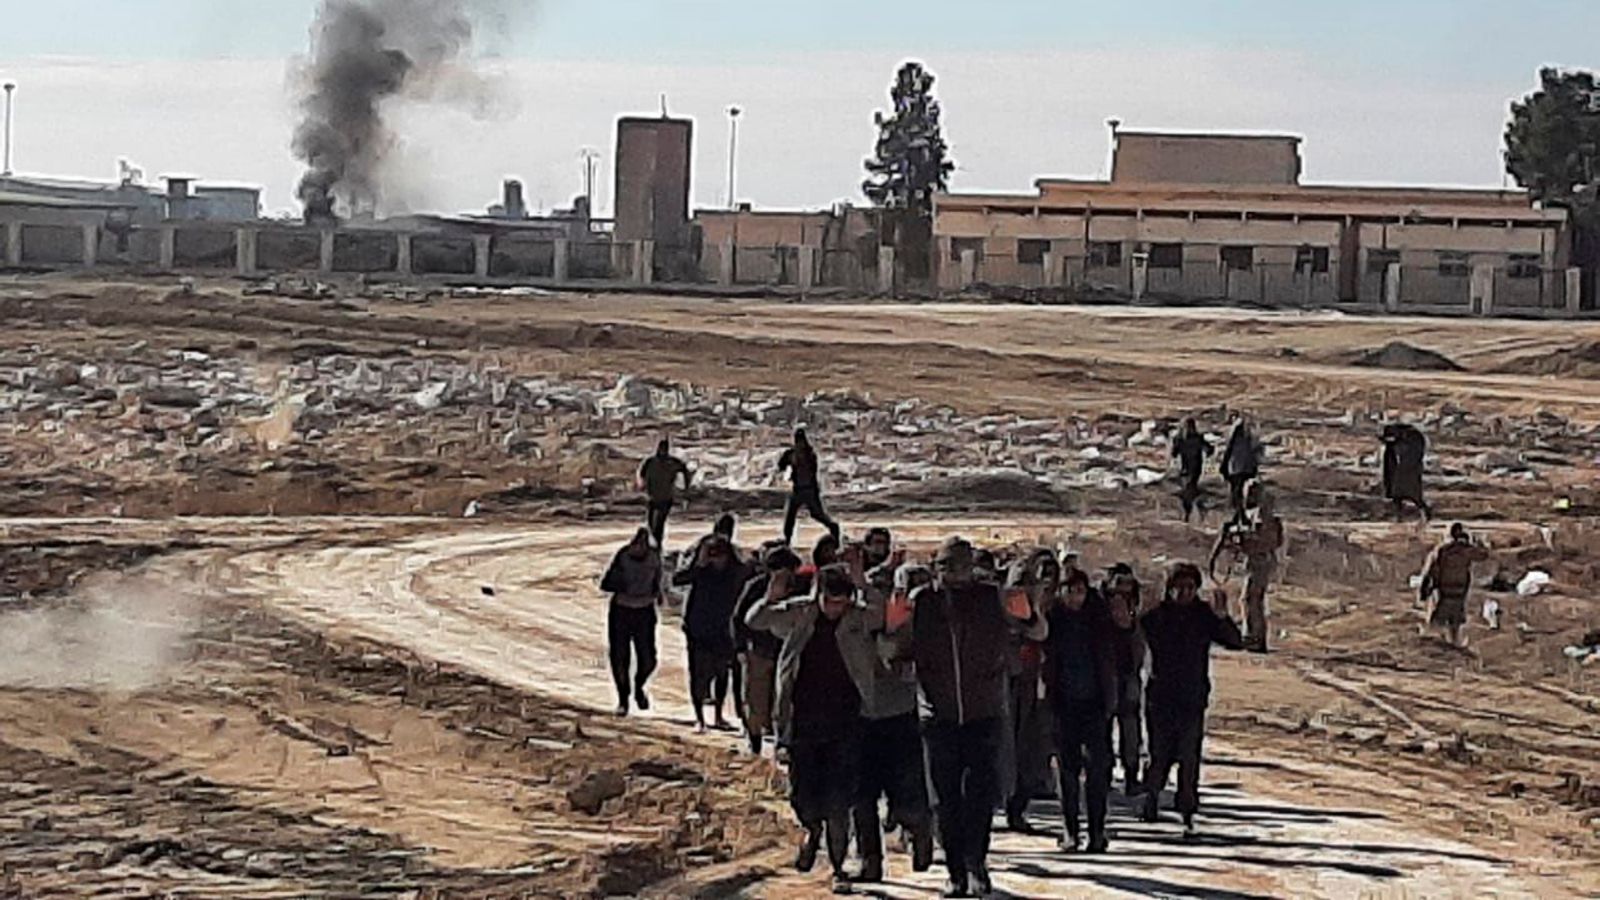 Fears Grow for 850 Children Trapped in ISIS-Seized Prison in Syria